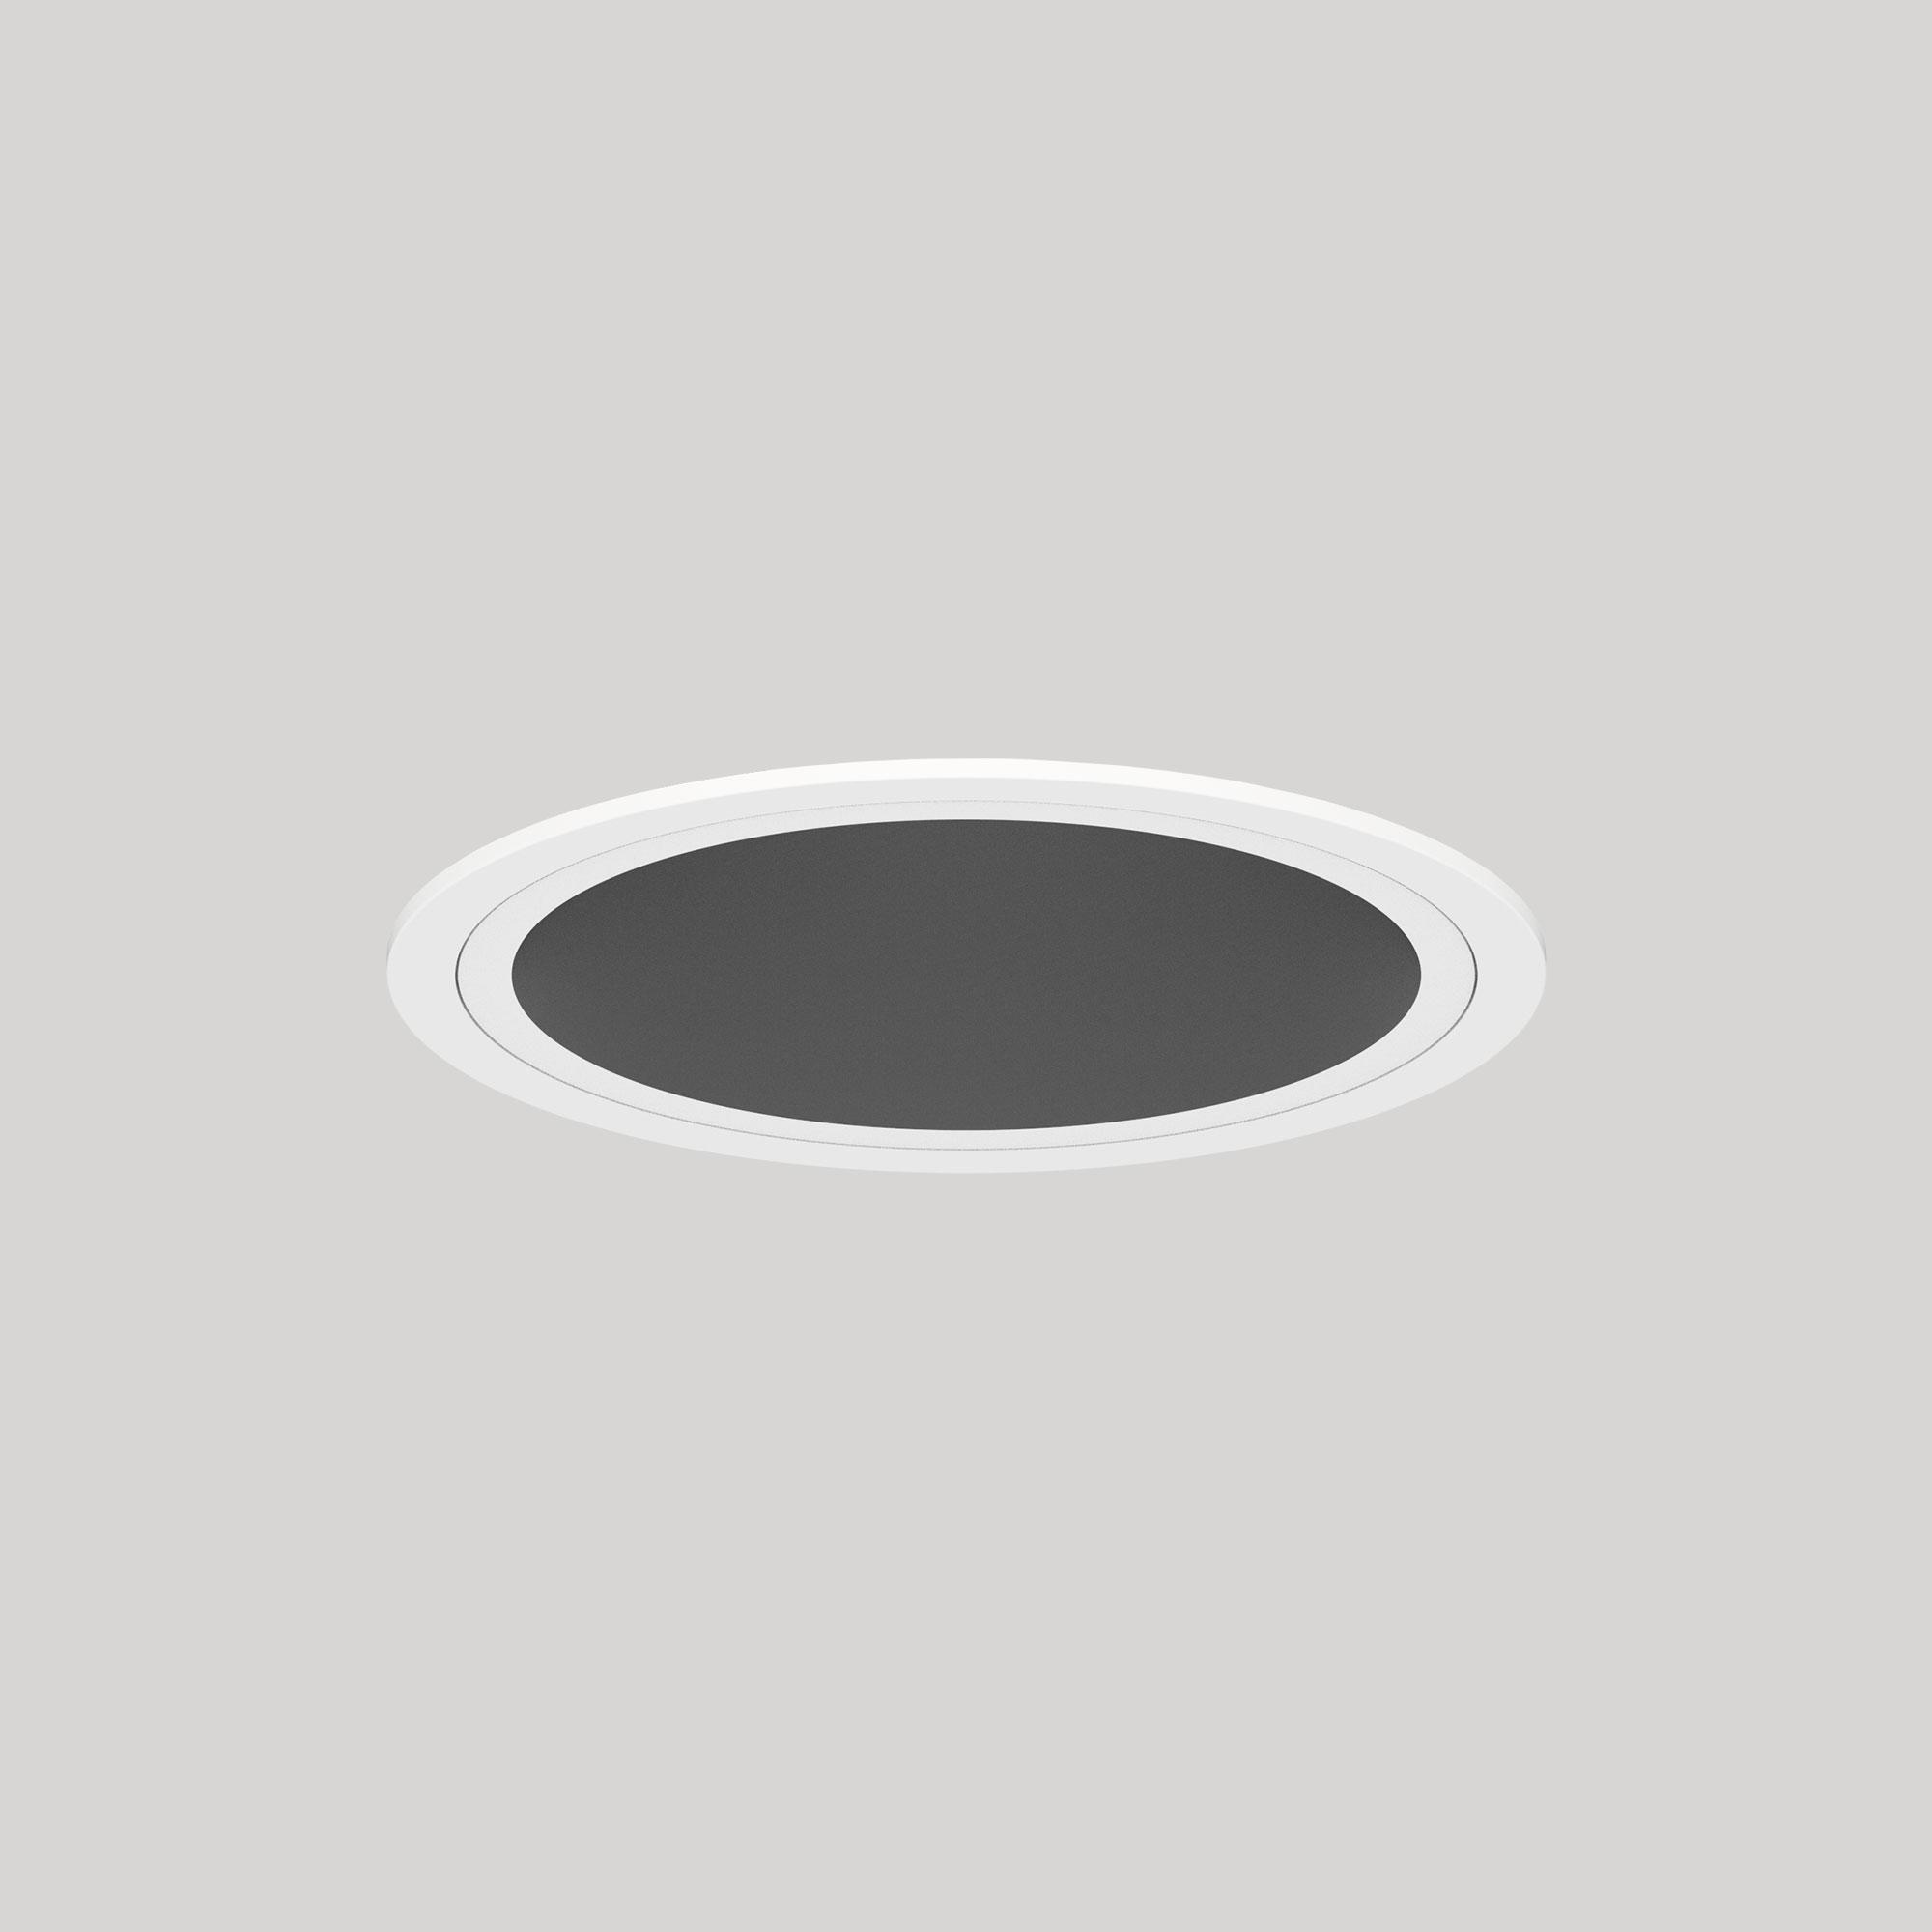 Standard 114mm Ceiling Recessed Round Fixed STD-E01C1E-WBP - Standard-STD-E01-WB-Installed.jpg